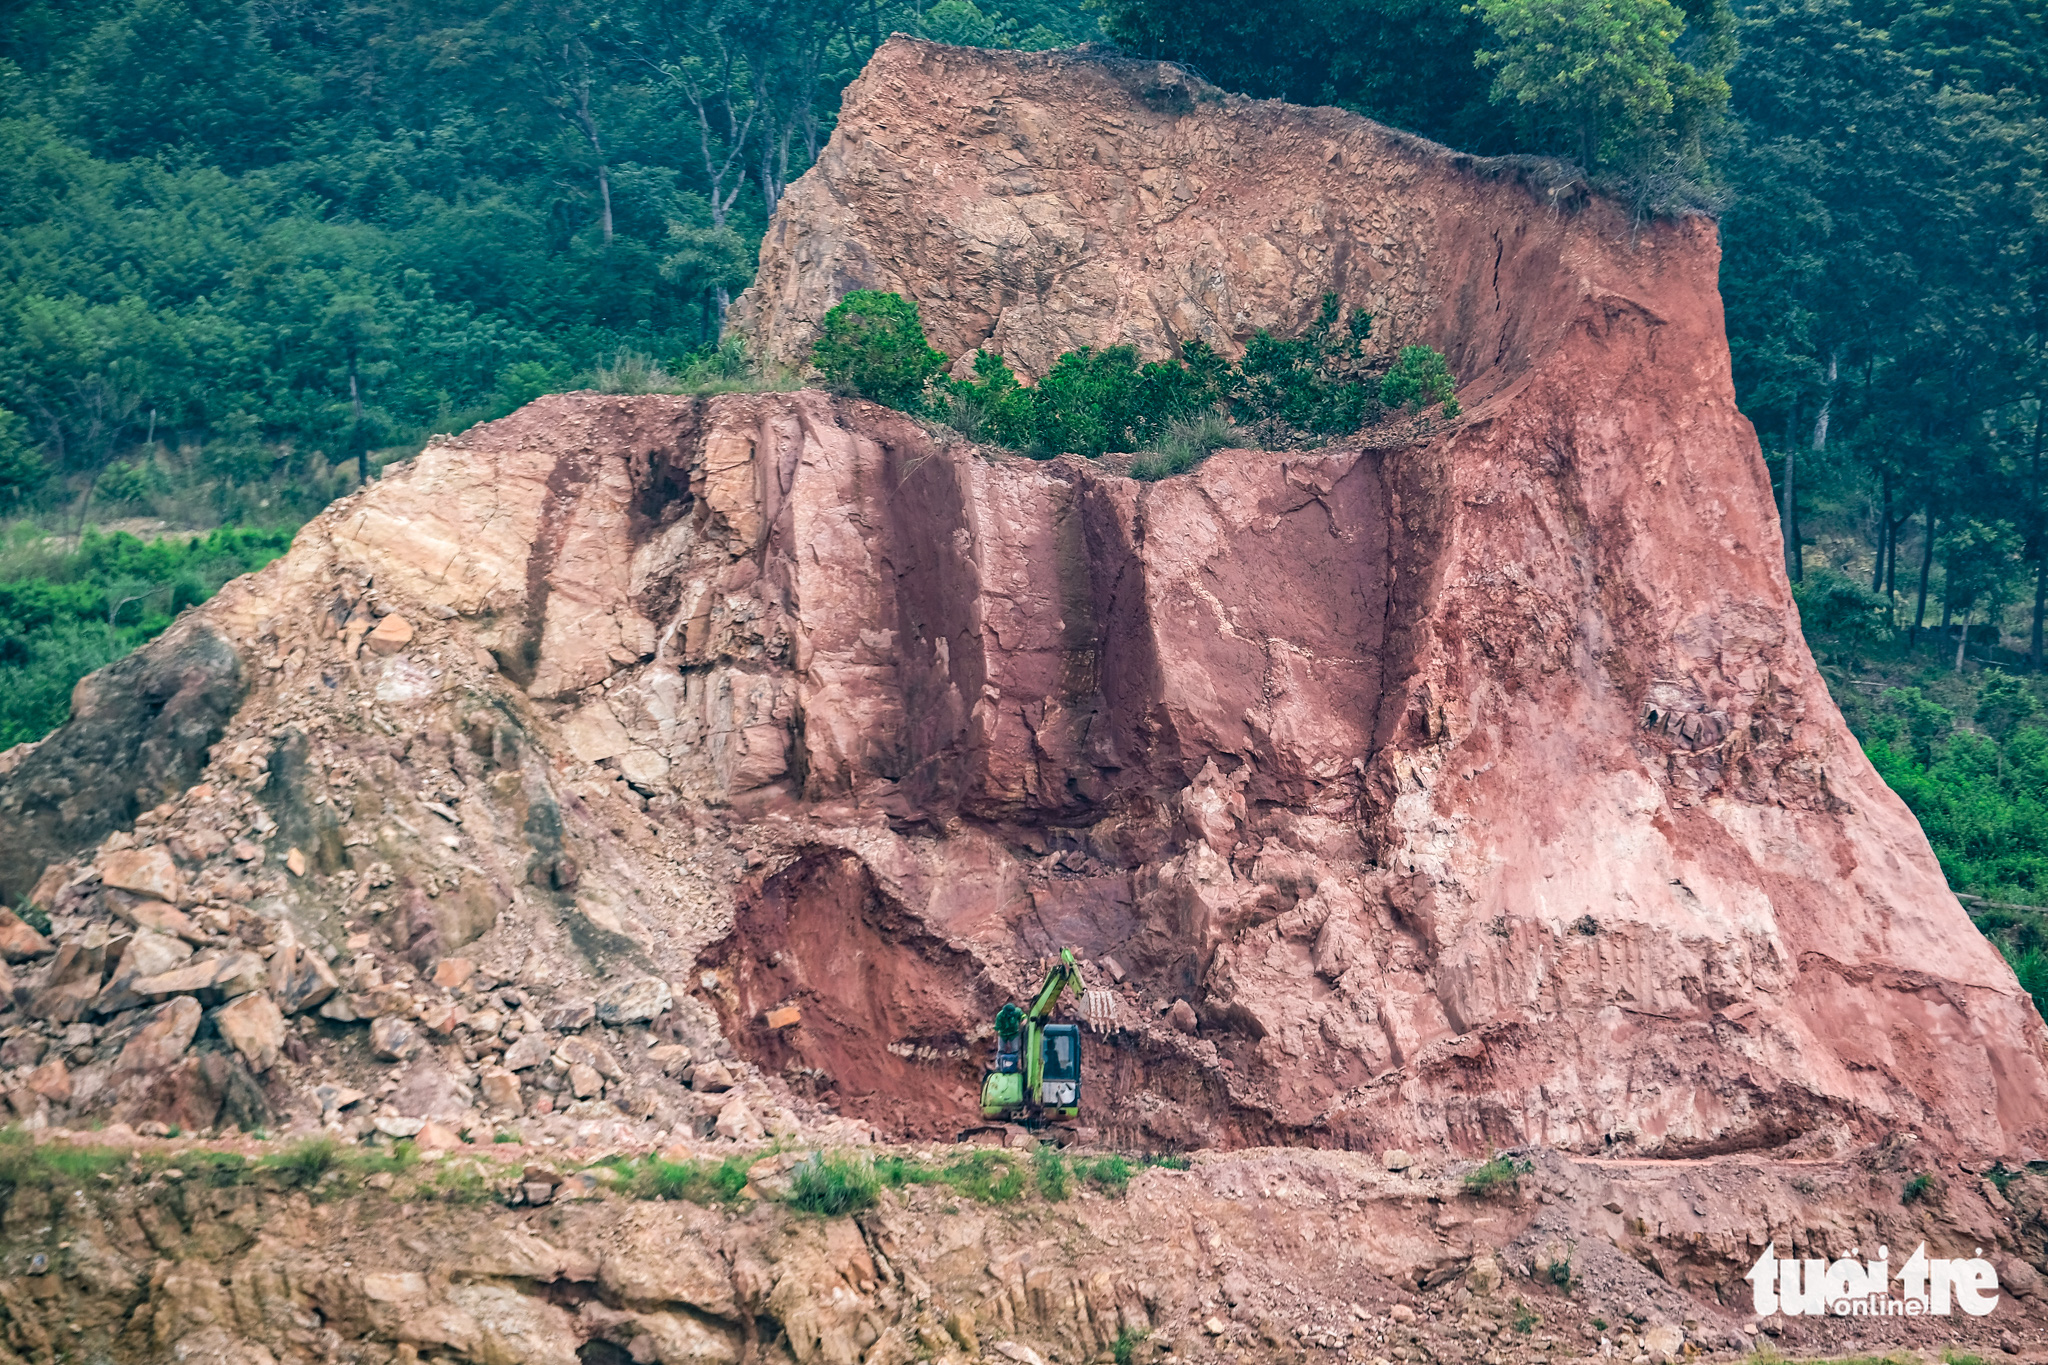 An excavator works on a flank of the destroyed Dinh mountain in Vinh Phuc Province, Vietnam. Photo: Tuoi Tre